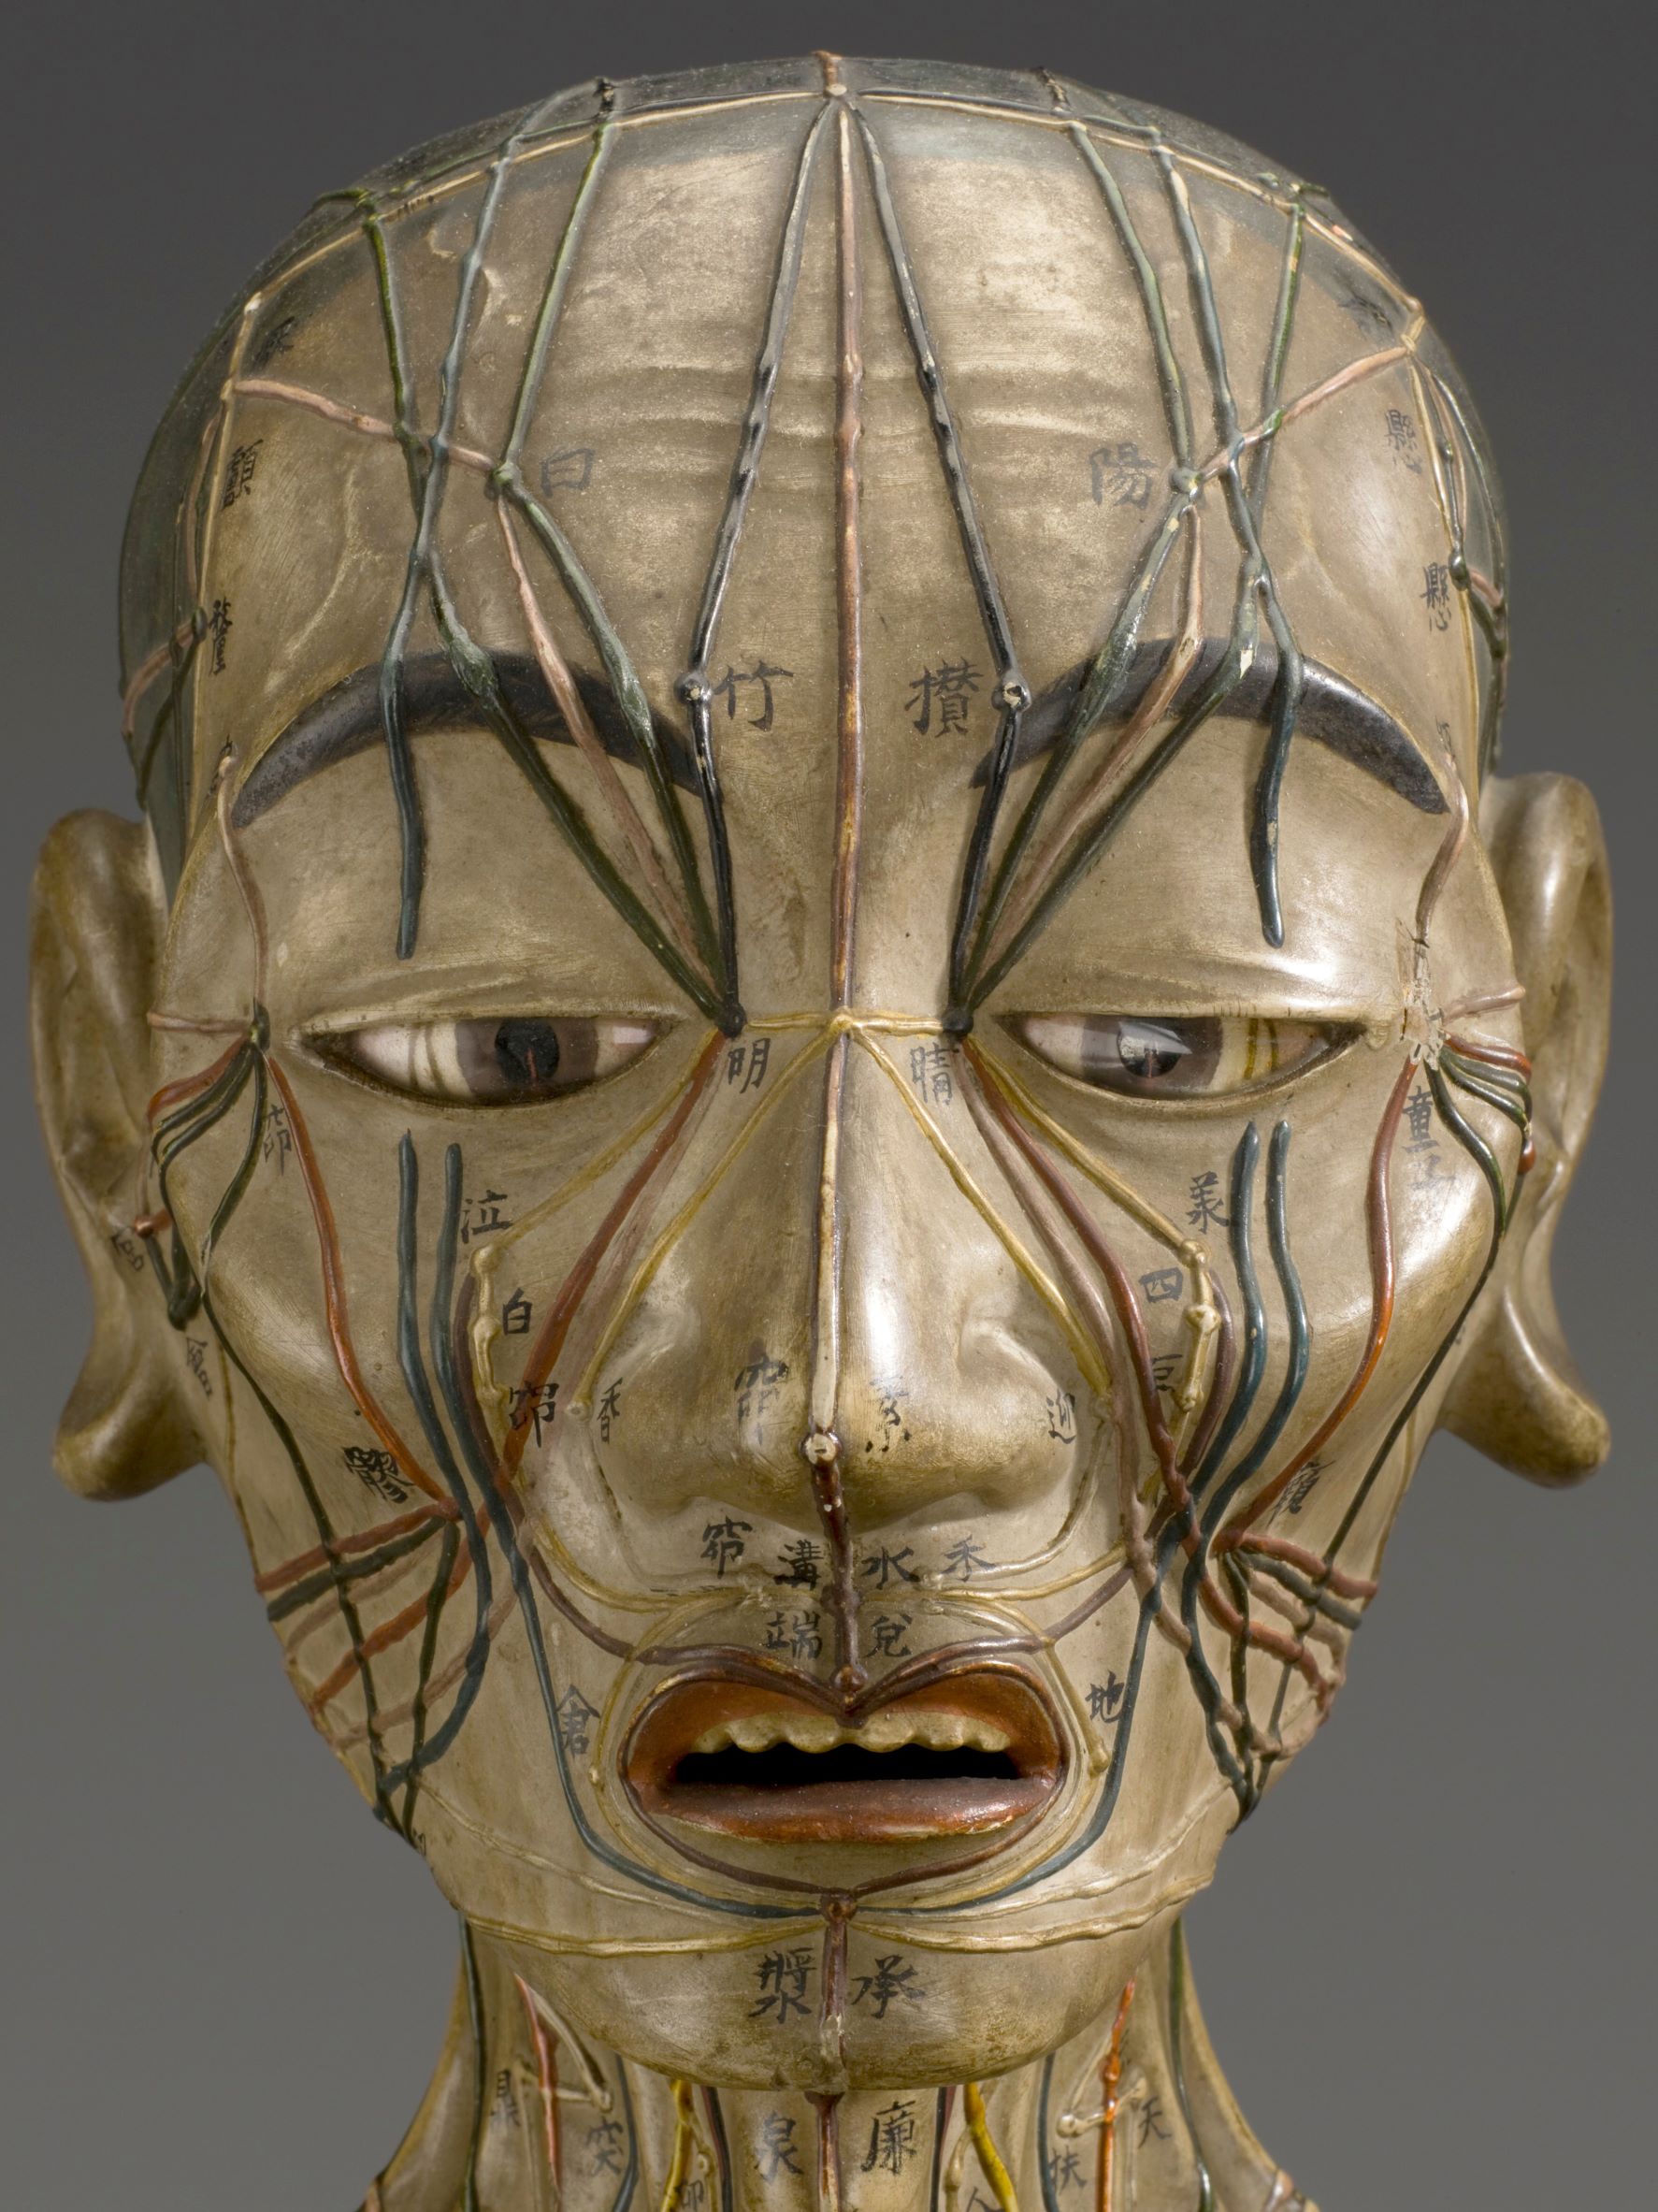 Wooden acupuncture model, Asia, 1600s. Front detail view of head. Grey background.